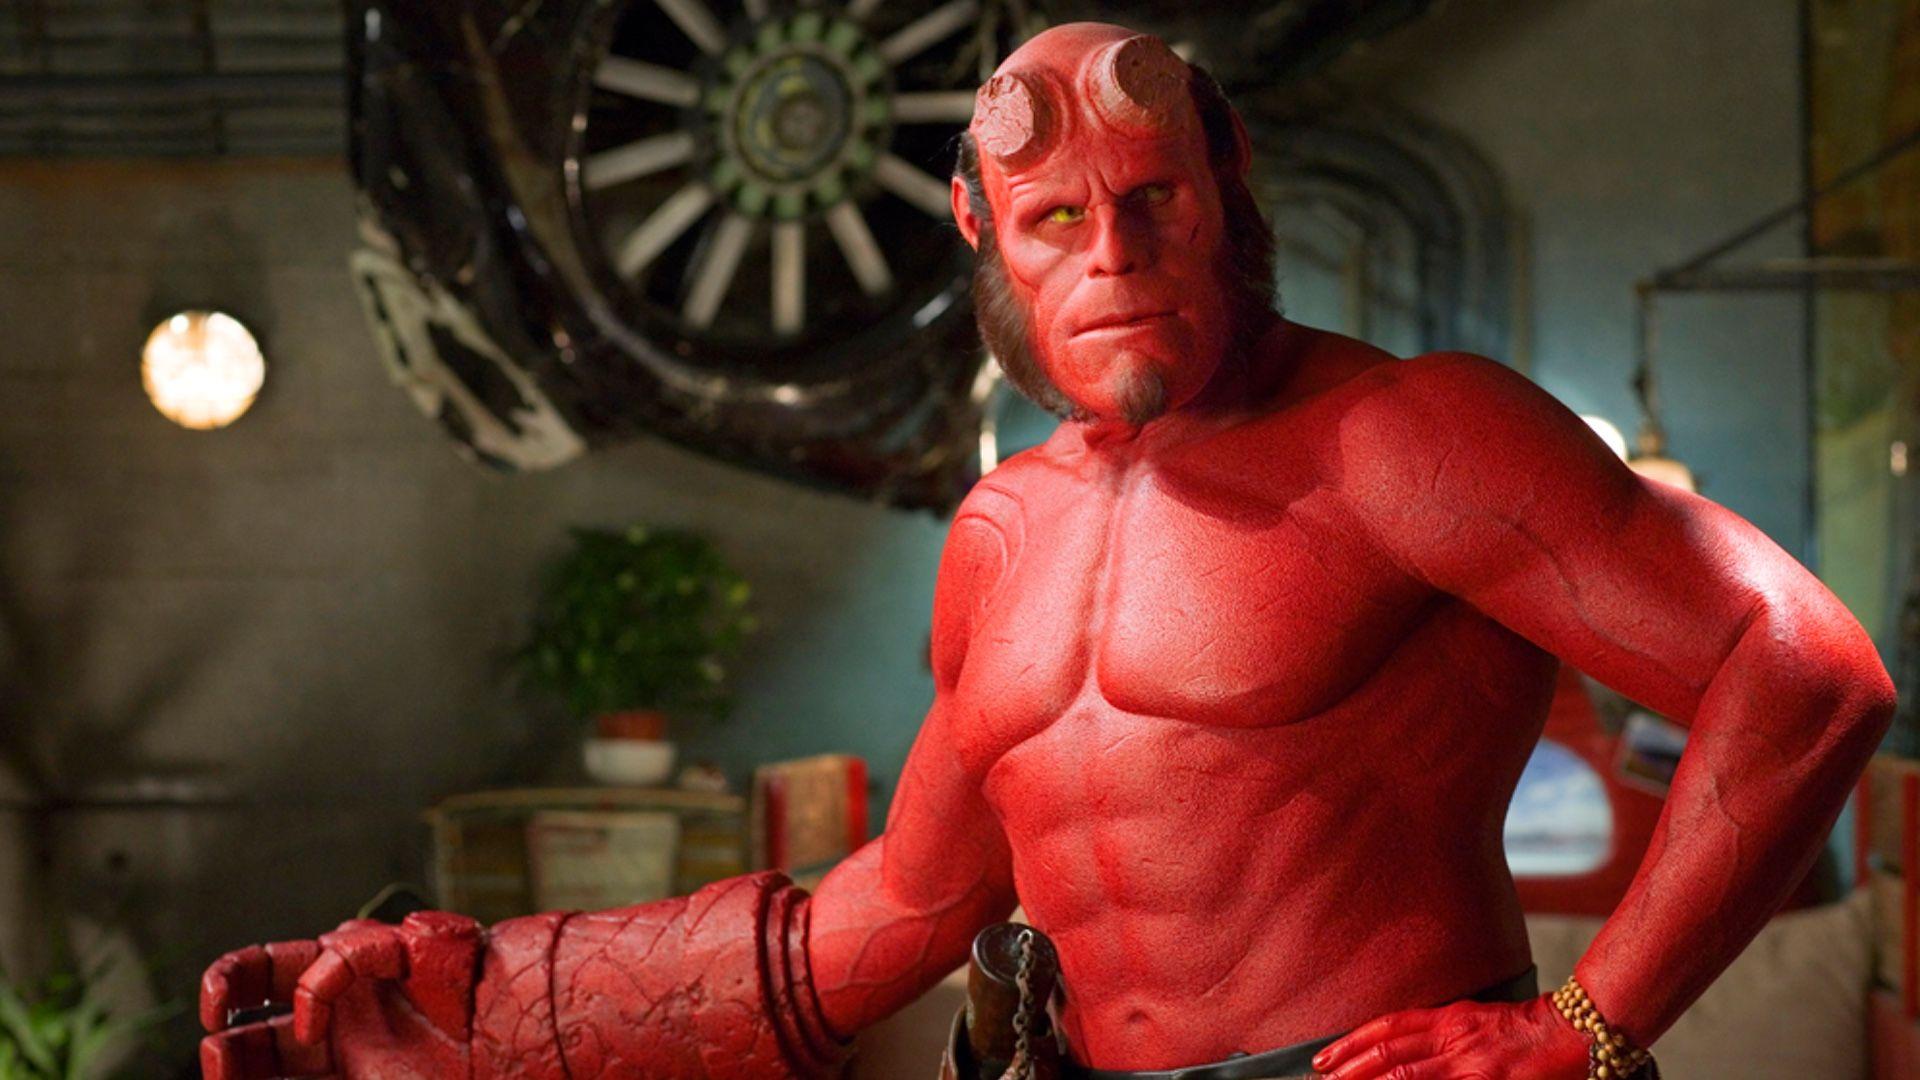 This New Poster For Neil Marshall’s Hellboy Is Seriously Incredible